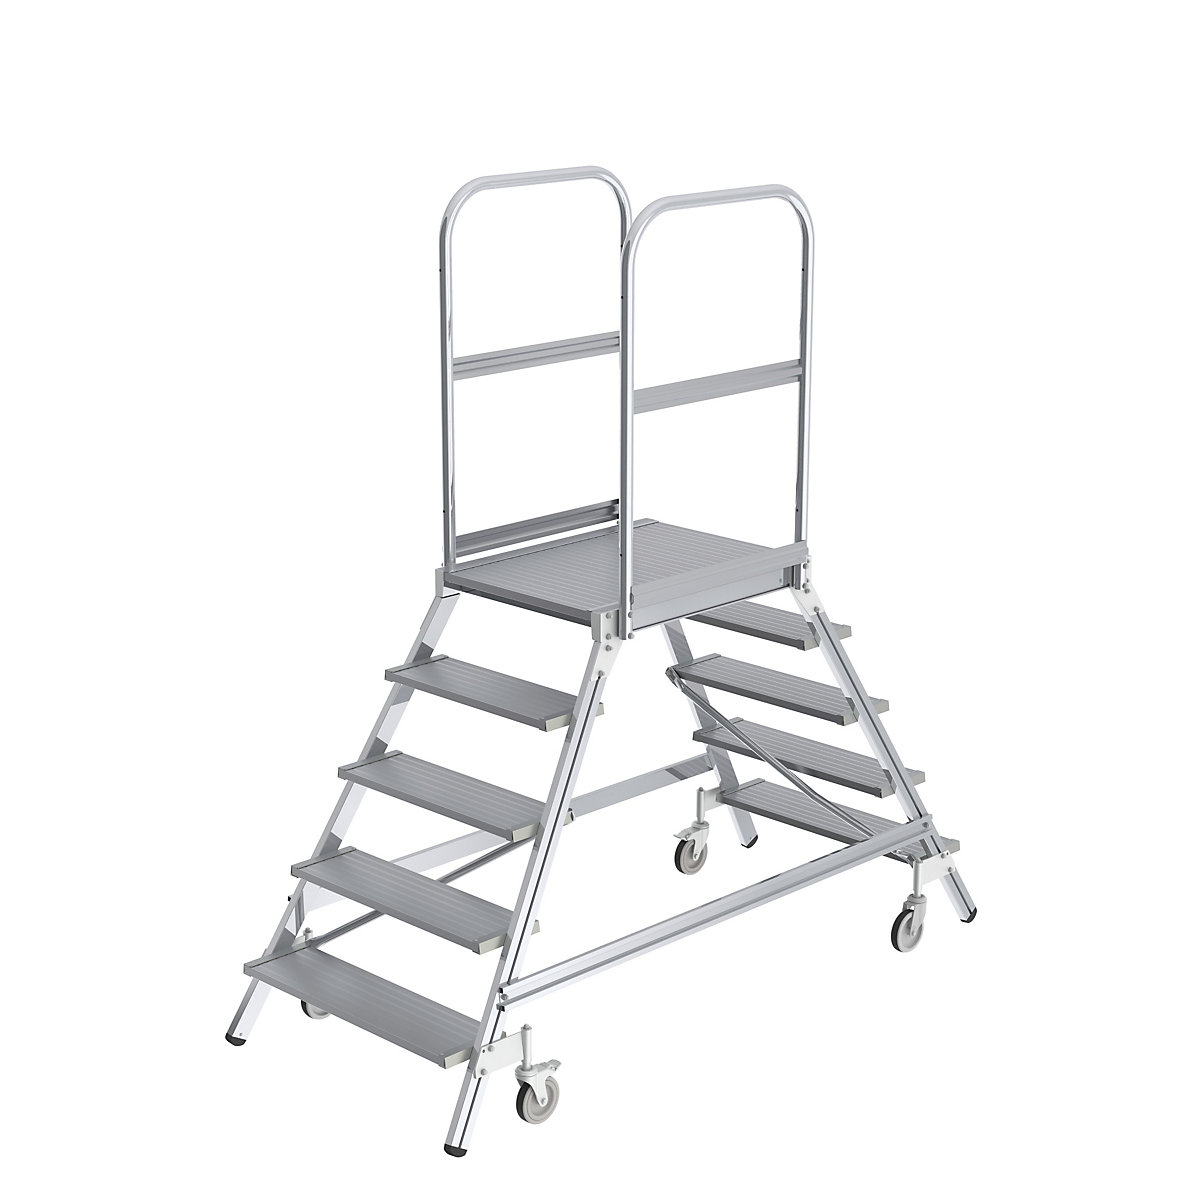 Platform steps with double sided access – MUNK, platform and steps made of light alloy, 2x5 steps inclusive platform-7